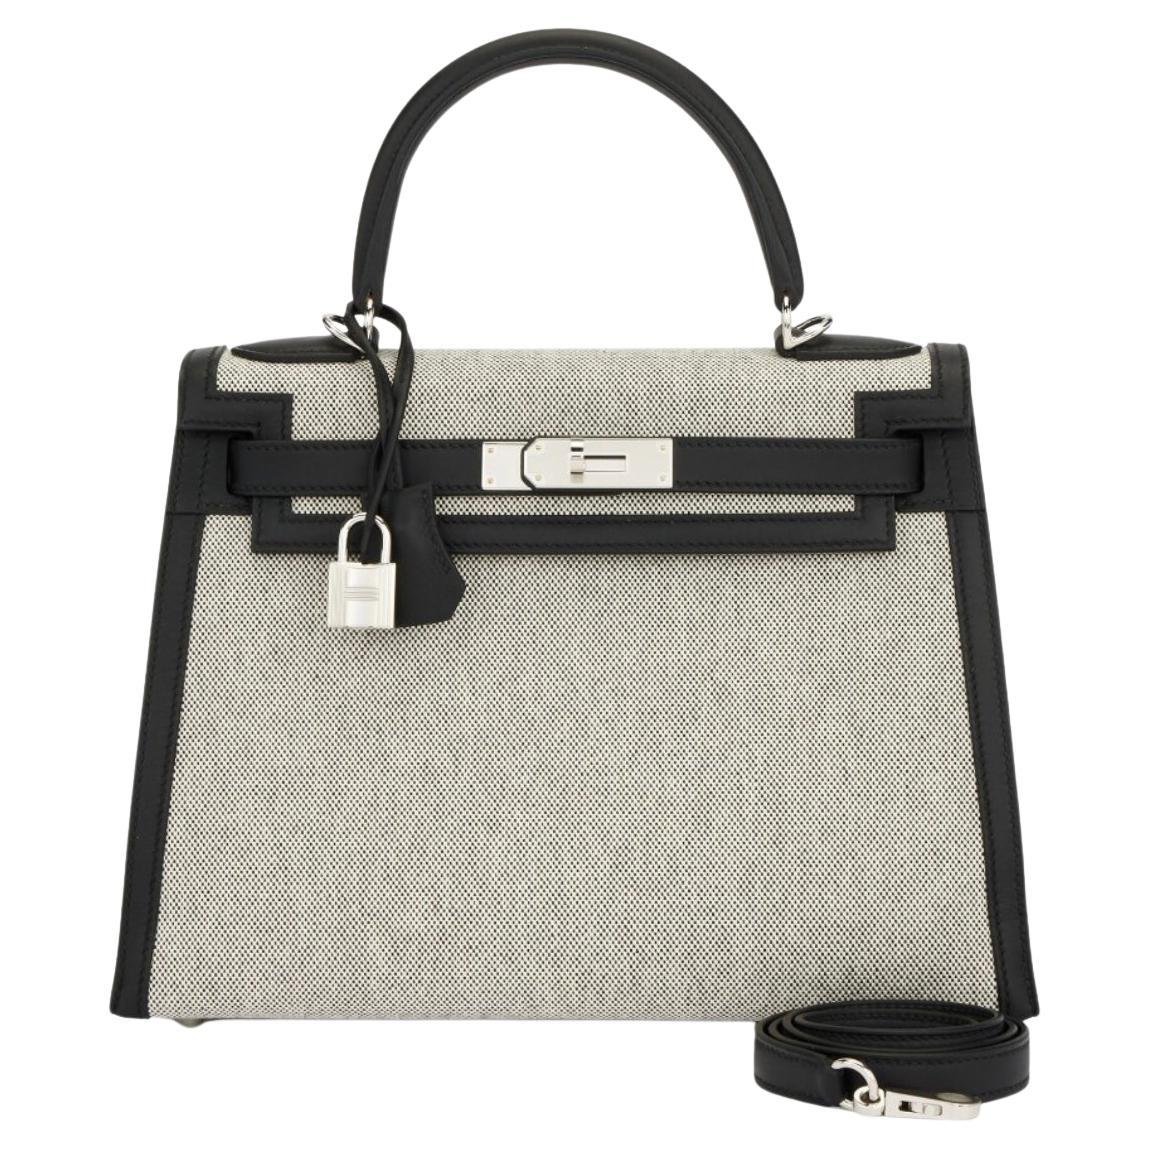 Hermes Kelly 28 Black swift and Toile palladium hardware bag For Sale